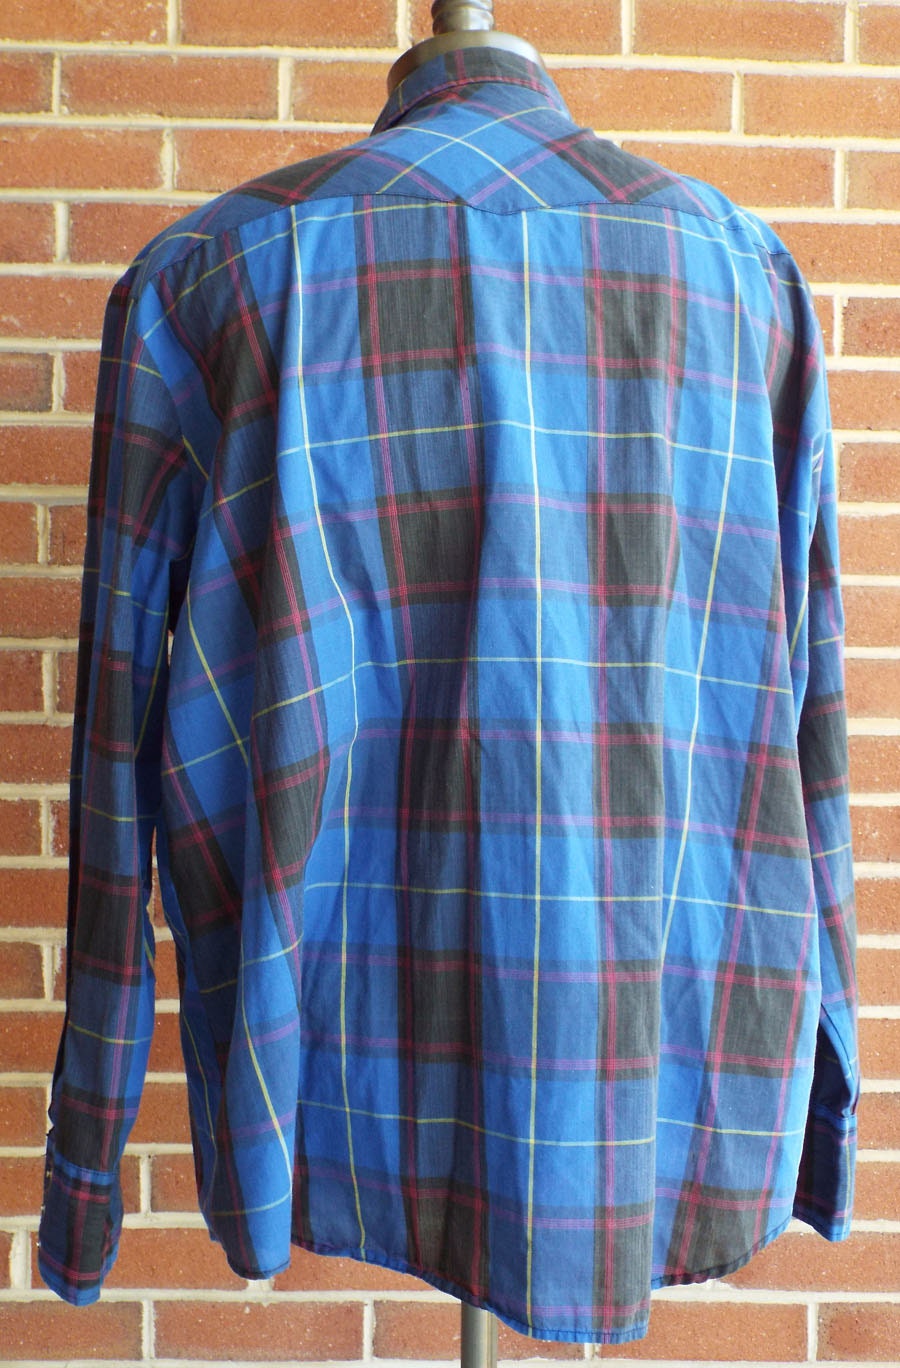 Vintage Long Sleeve Western Snap Shirt For the Large Man by Authentic Western Youngbloods